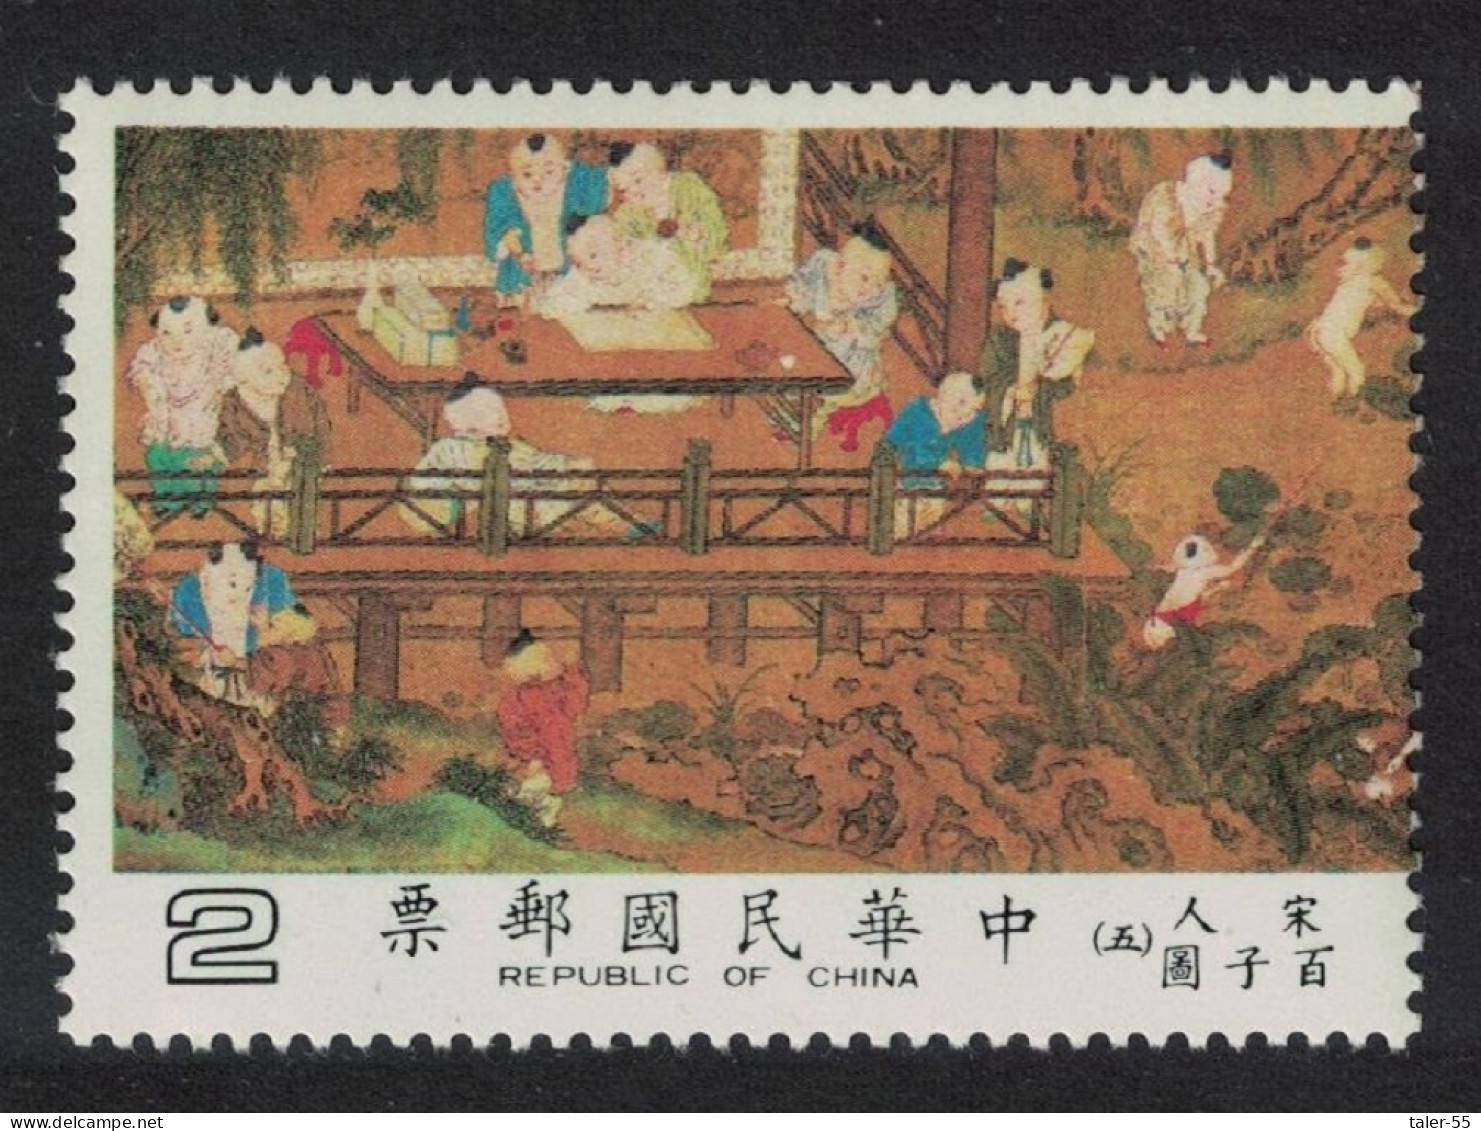 Taiwan Drawing Painting 'One Hundred Young Boys' $2 1981 MNH SG#1403 MI#1436 - Ungebraucht